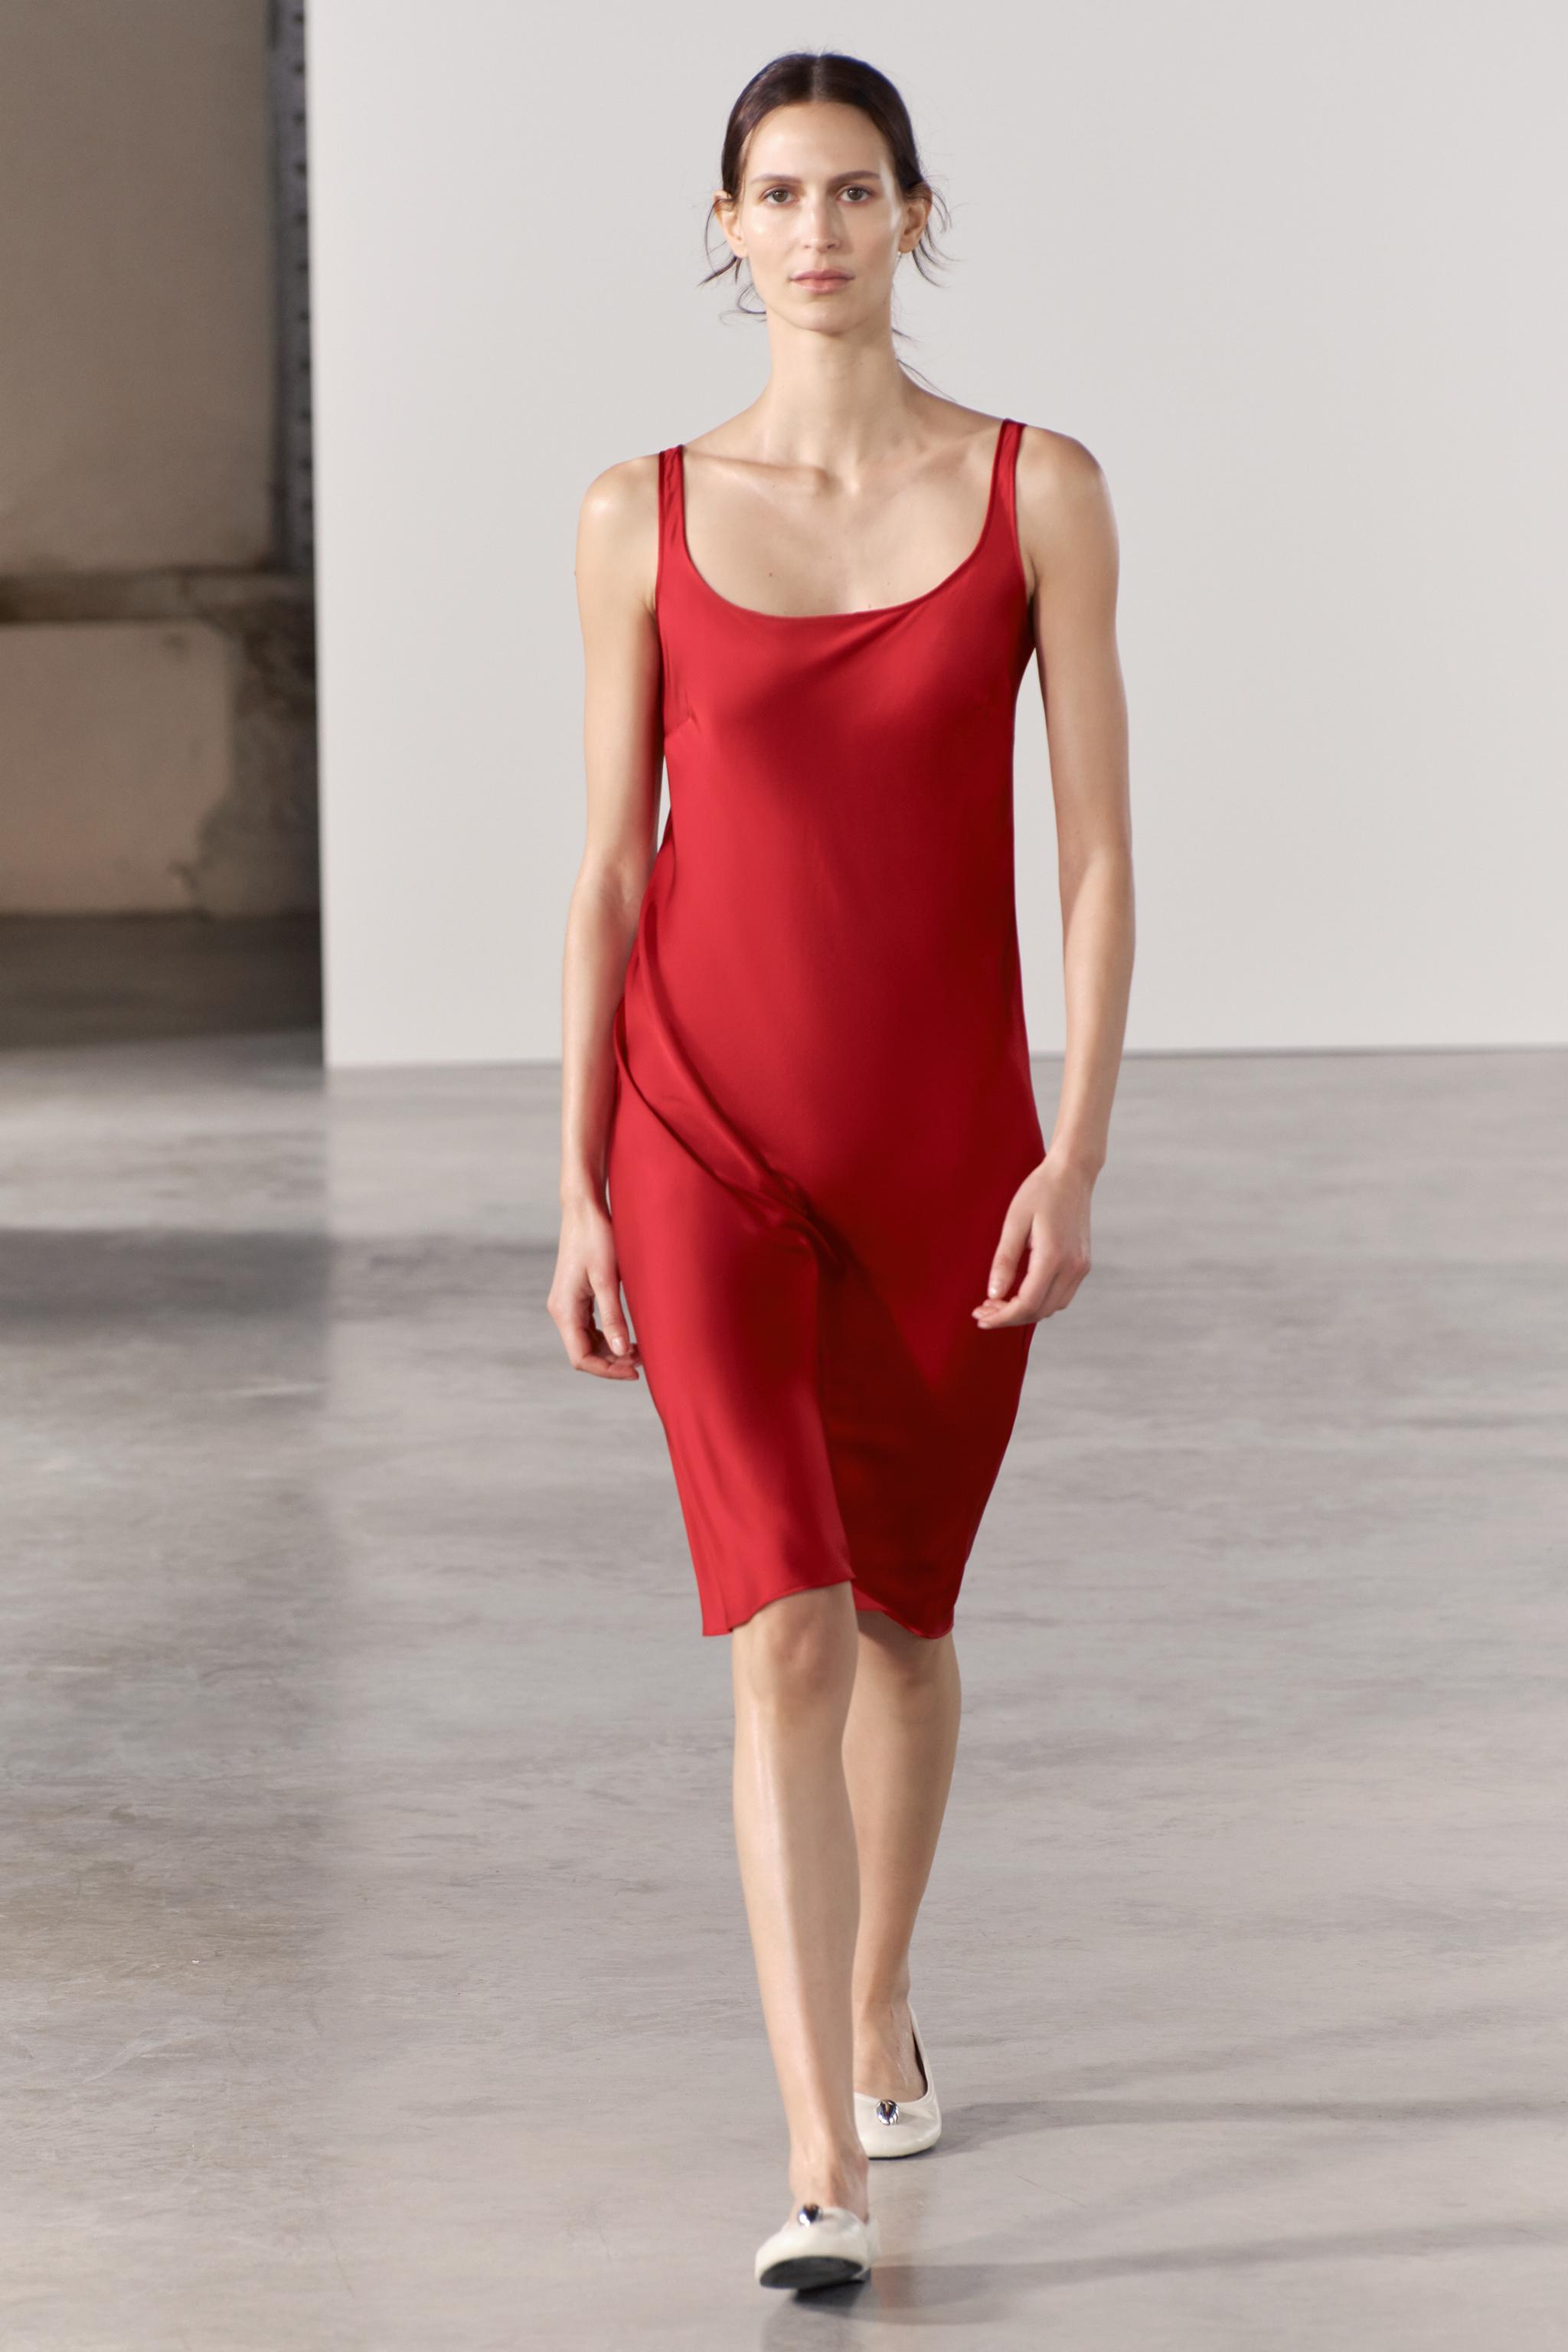 Zara New Collection Dresses 2021 - From Sketches to the Runway